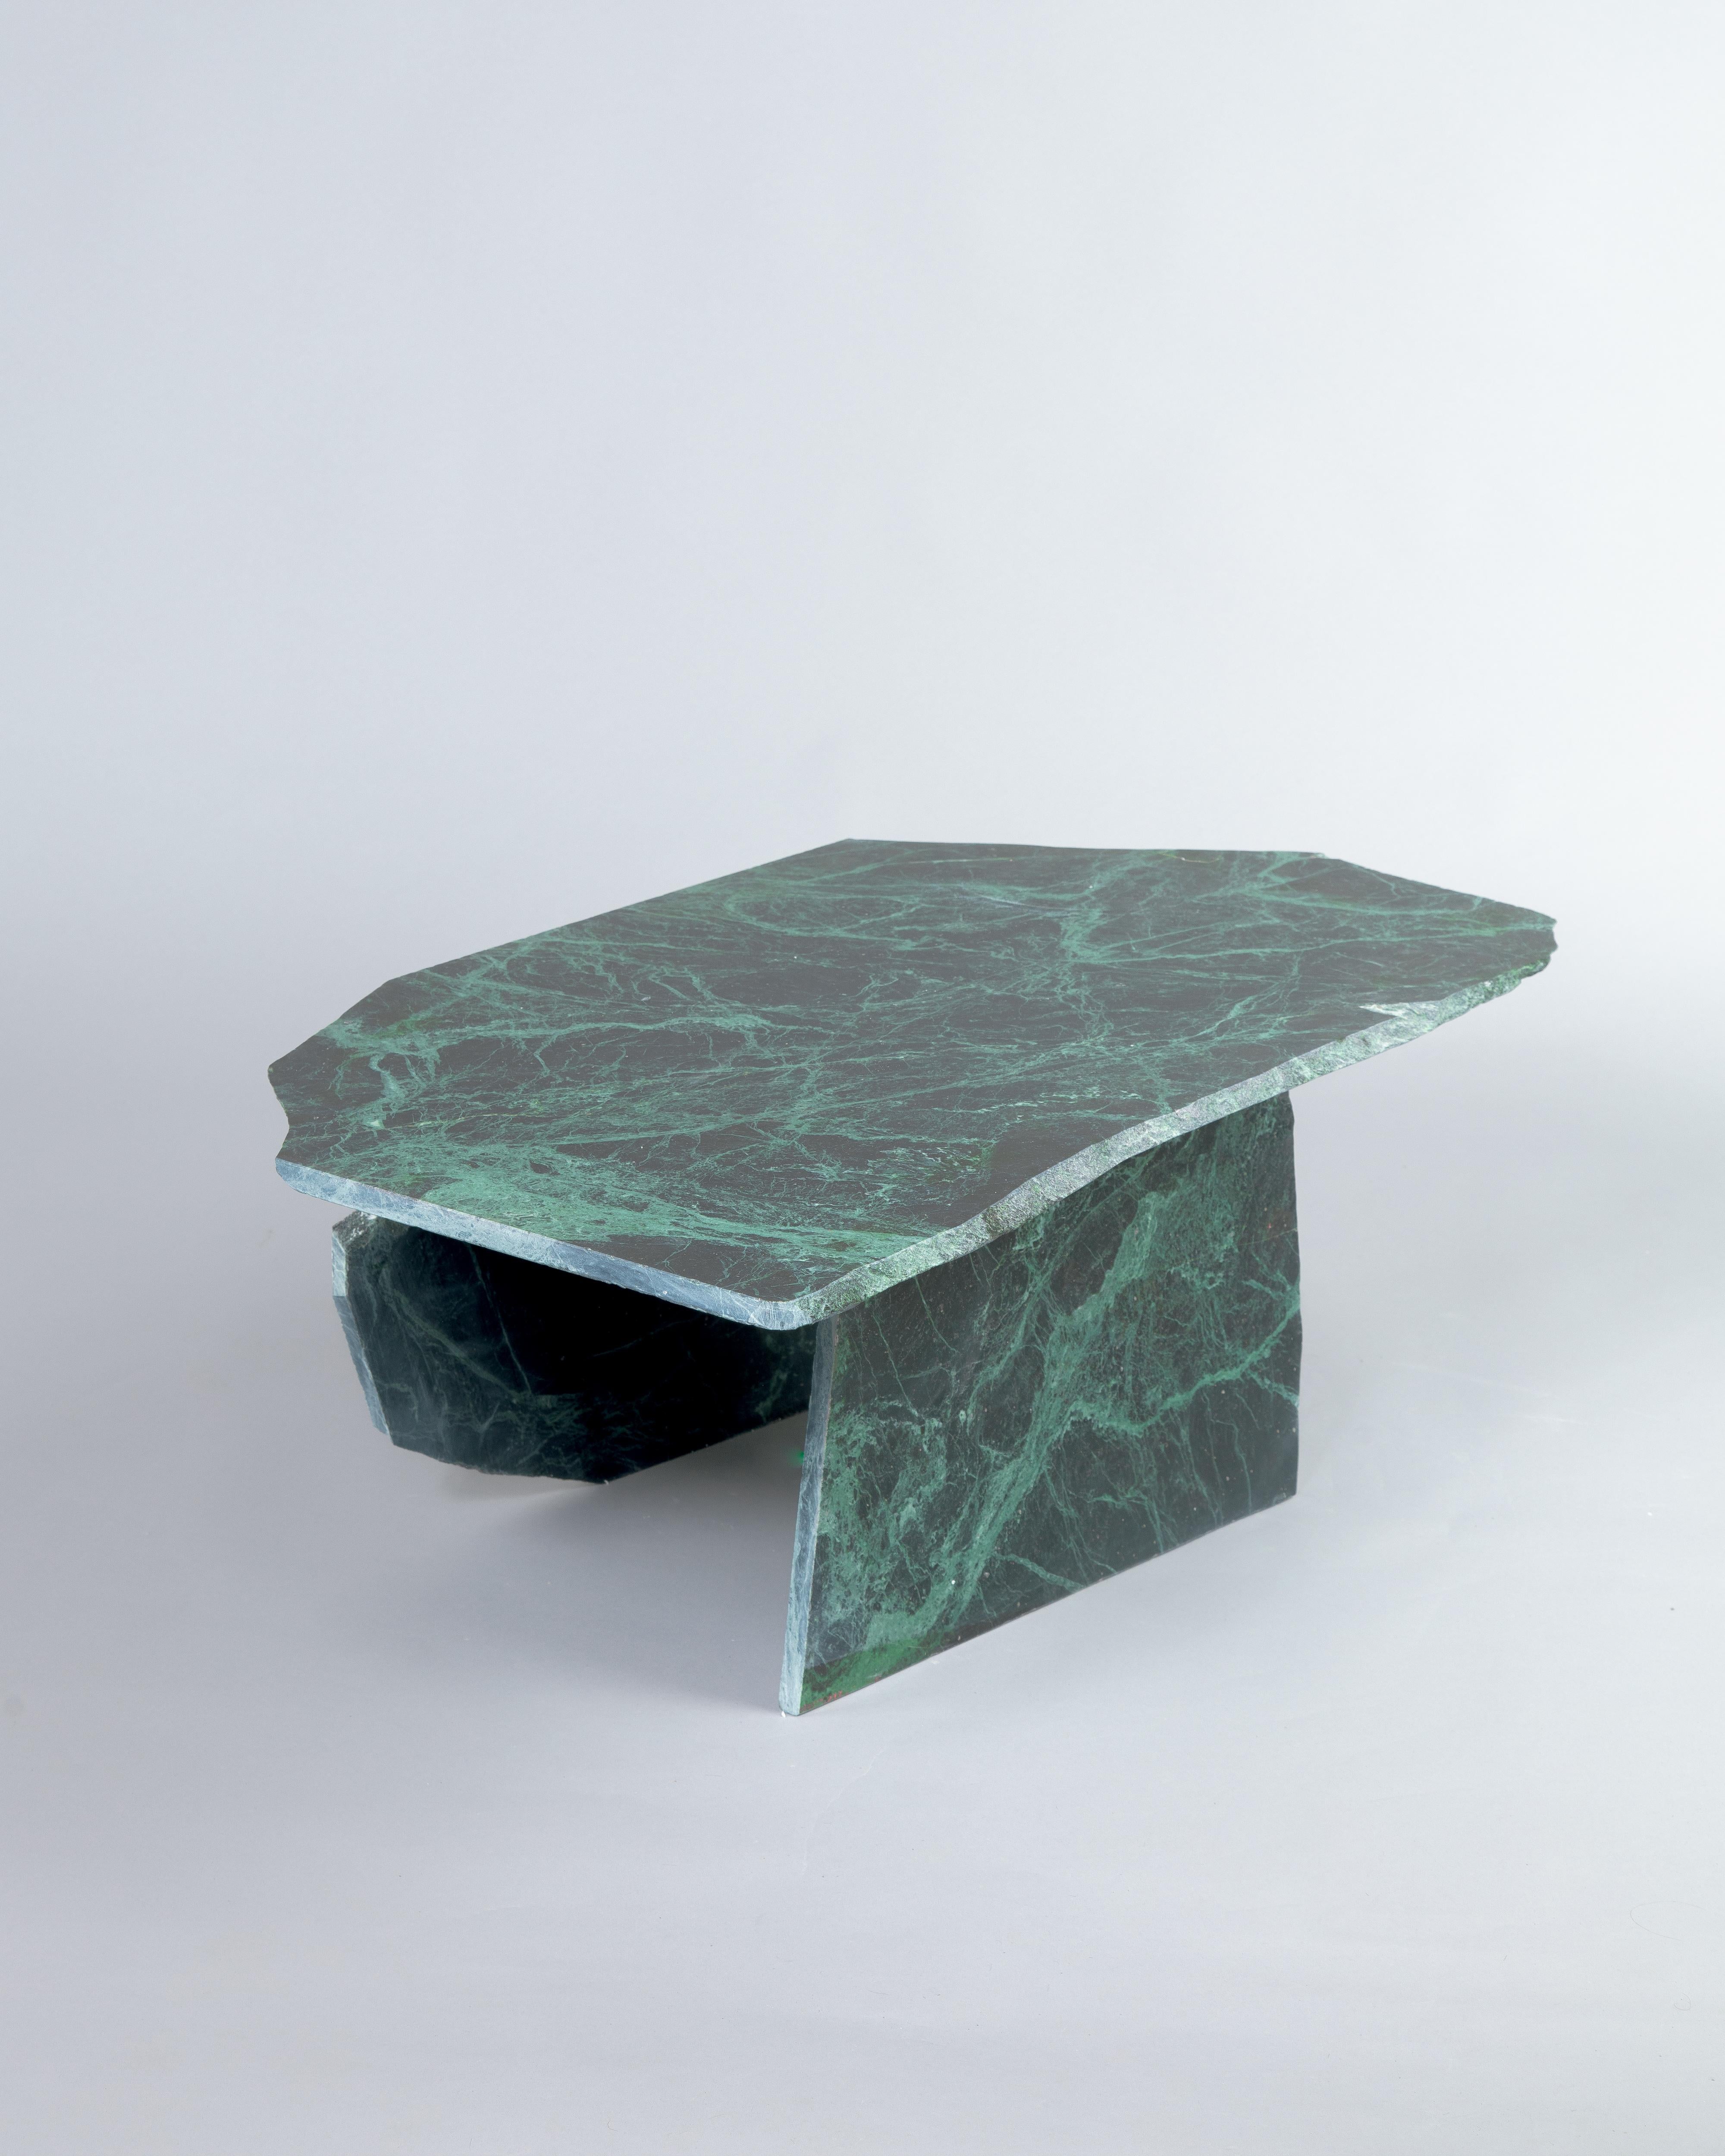 Shattered table mini by Daniel Nikolovski
One of a kind piece
Dimensions: W 68 x D 40 x H 27 cm
Also available in W 97 x D 53 x H 32 cm.
Materials: Serpentino marble matt

Leftover shattered marble pieces turned into functional coffee tables.